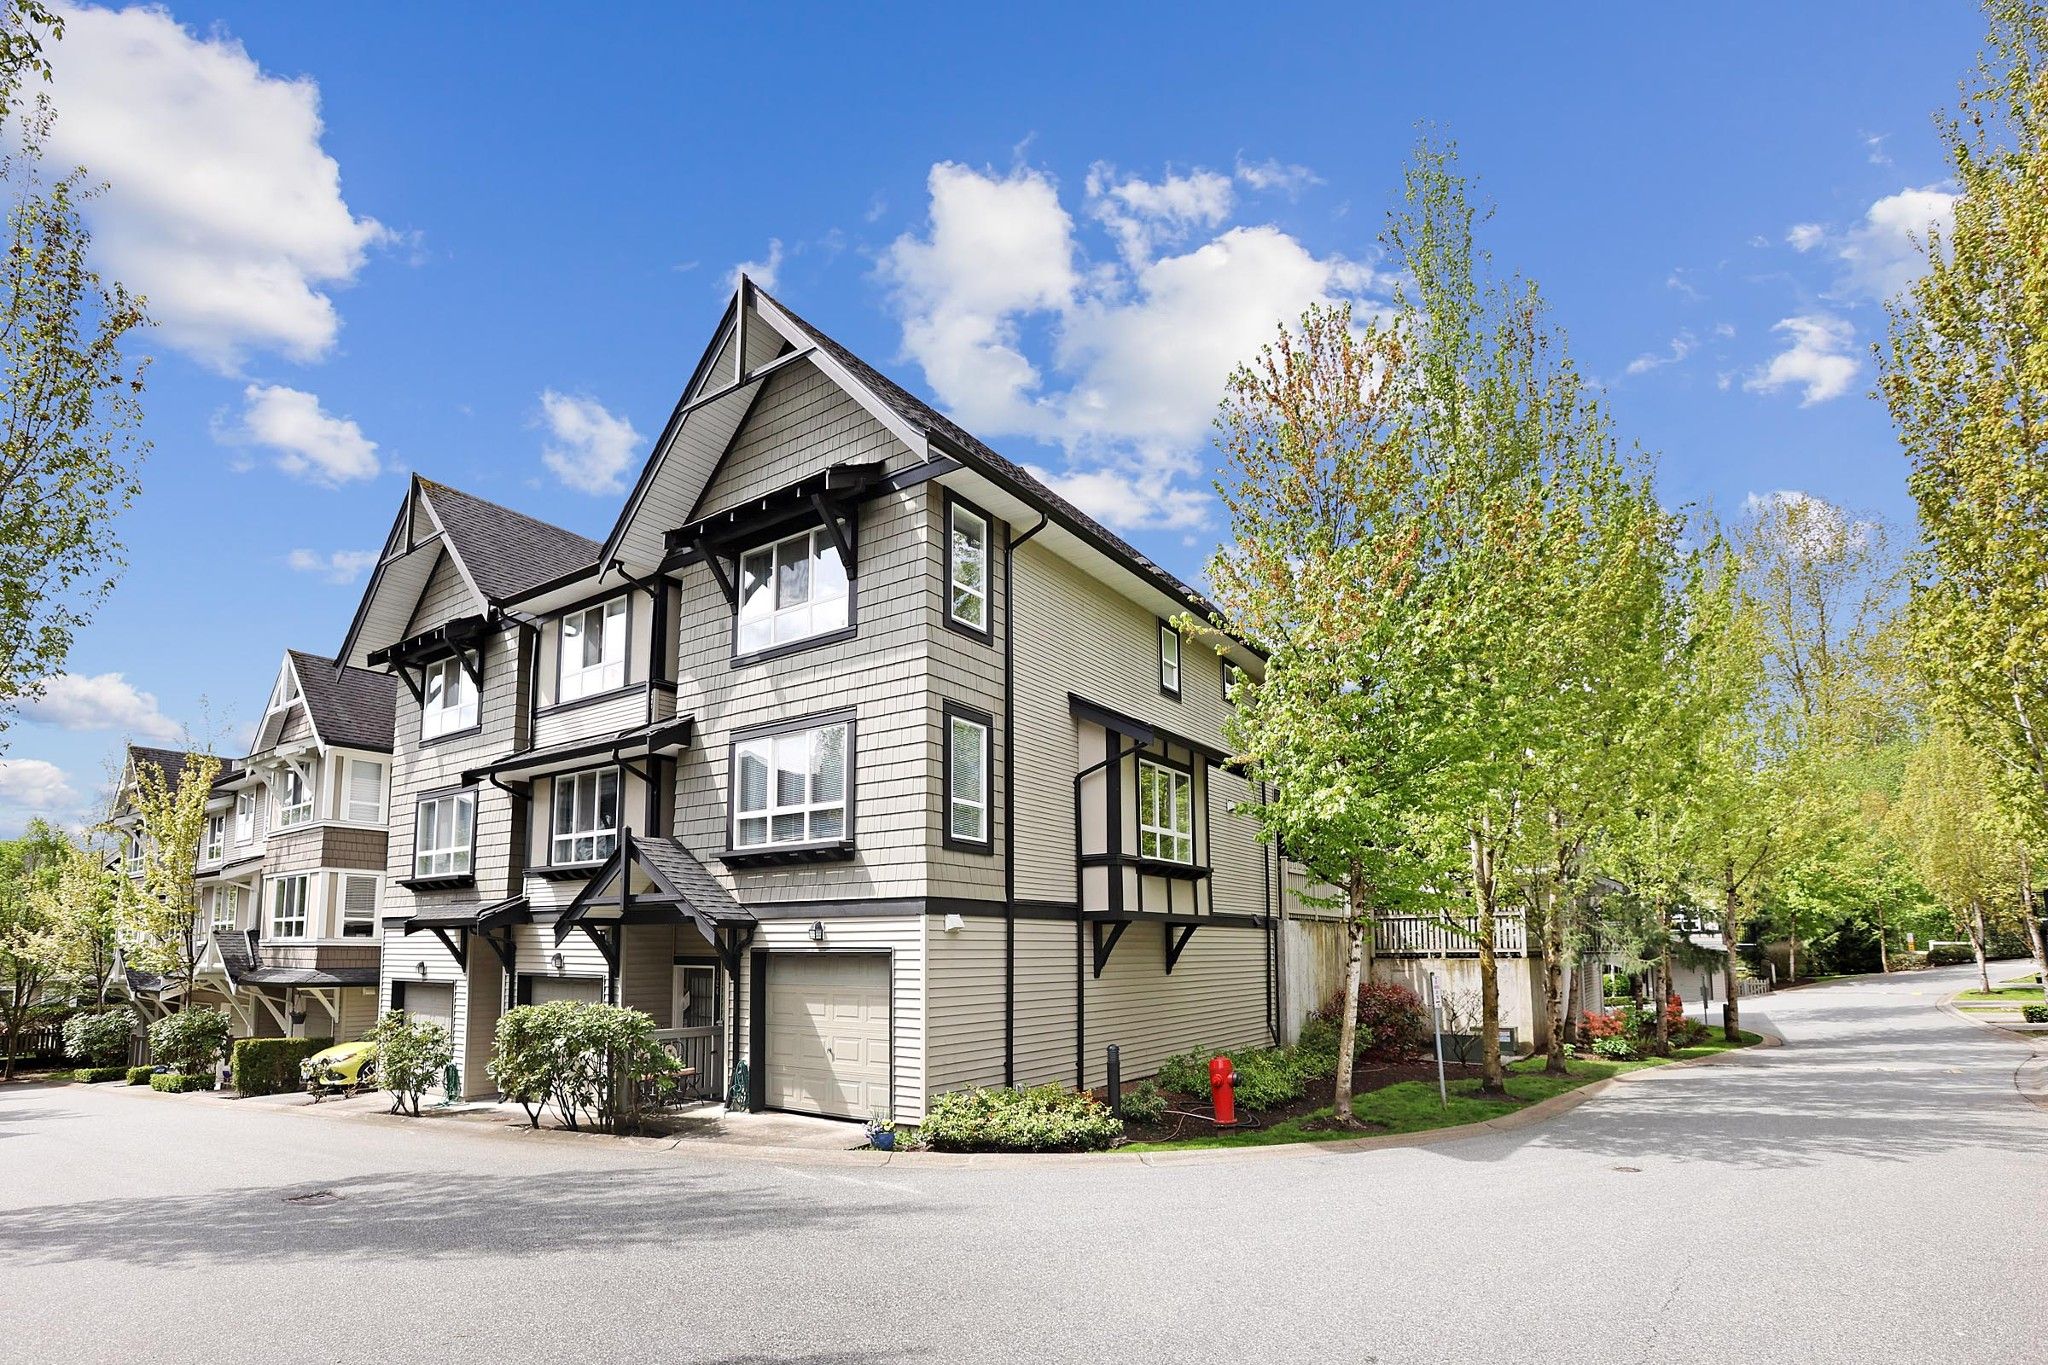 We have sold a property at 125 6747 203 ST in Langley